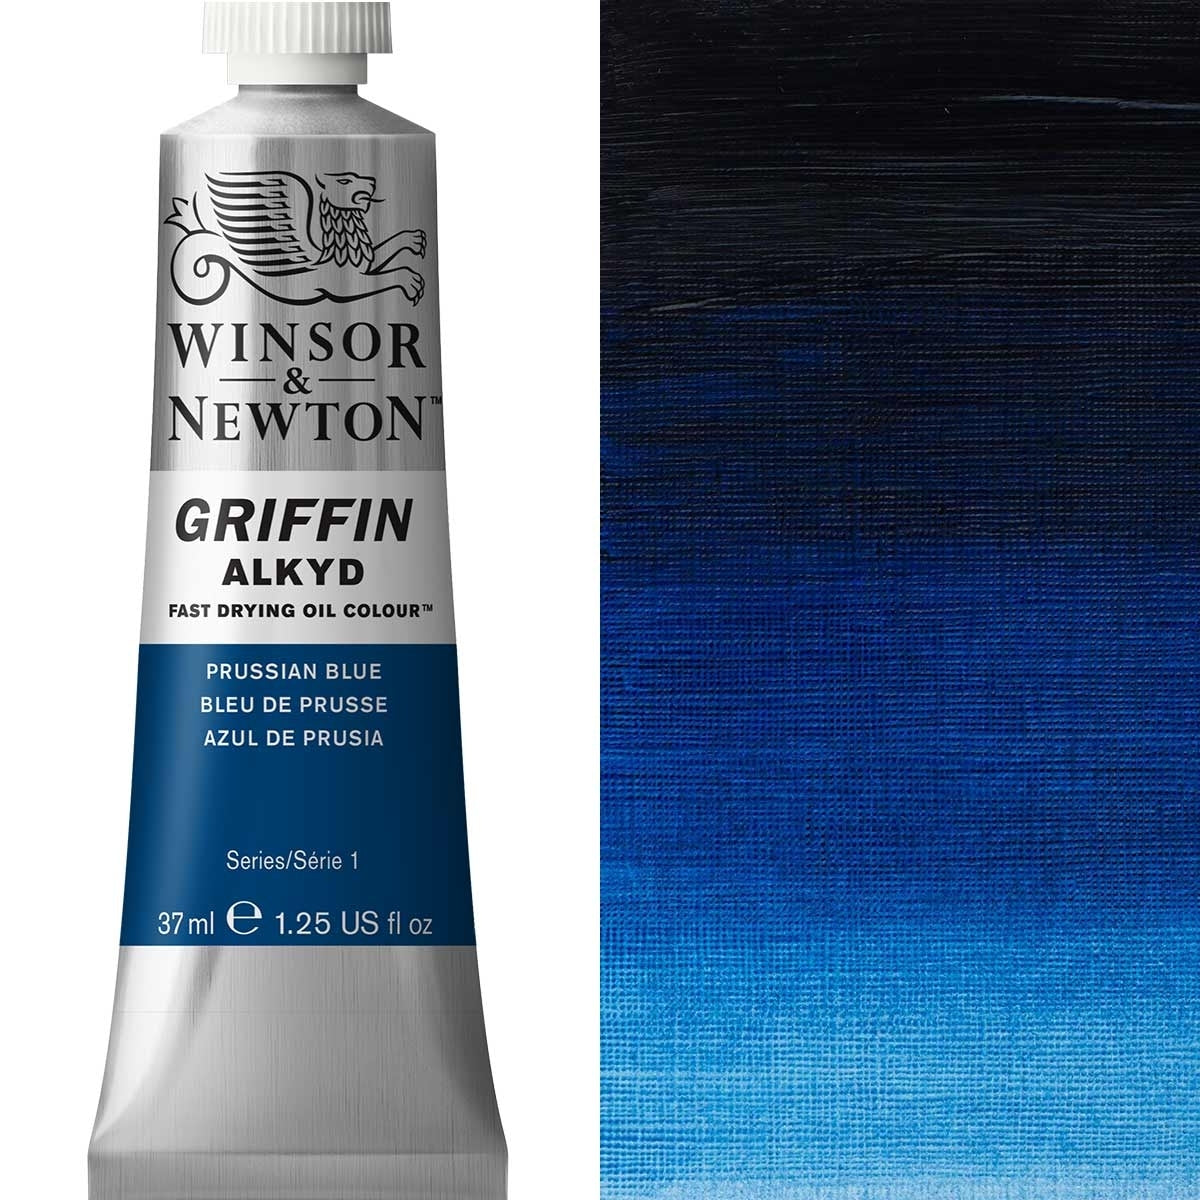 Winsor and Newton - Griffin ALKYD Oil Colour - 37ml - Prussian Blue